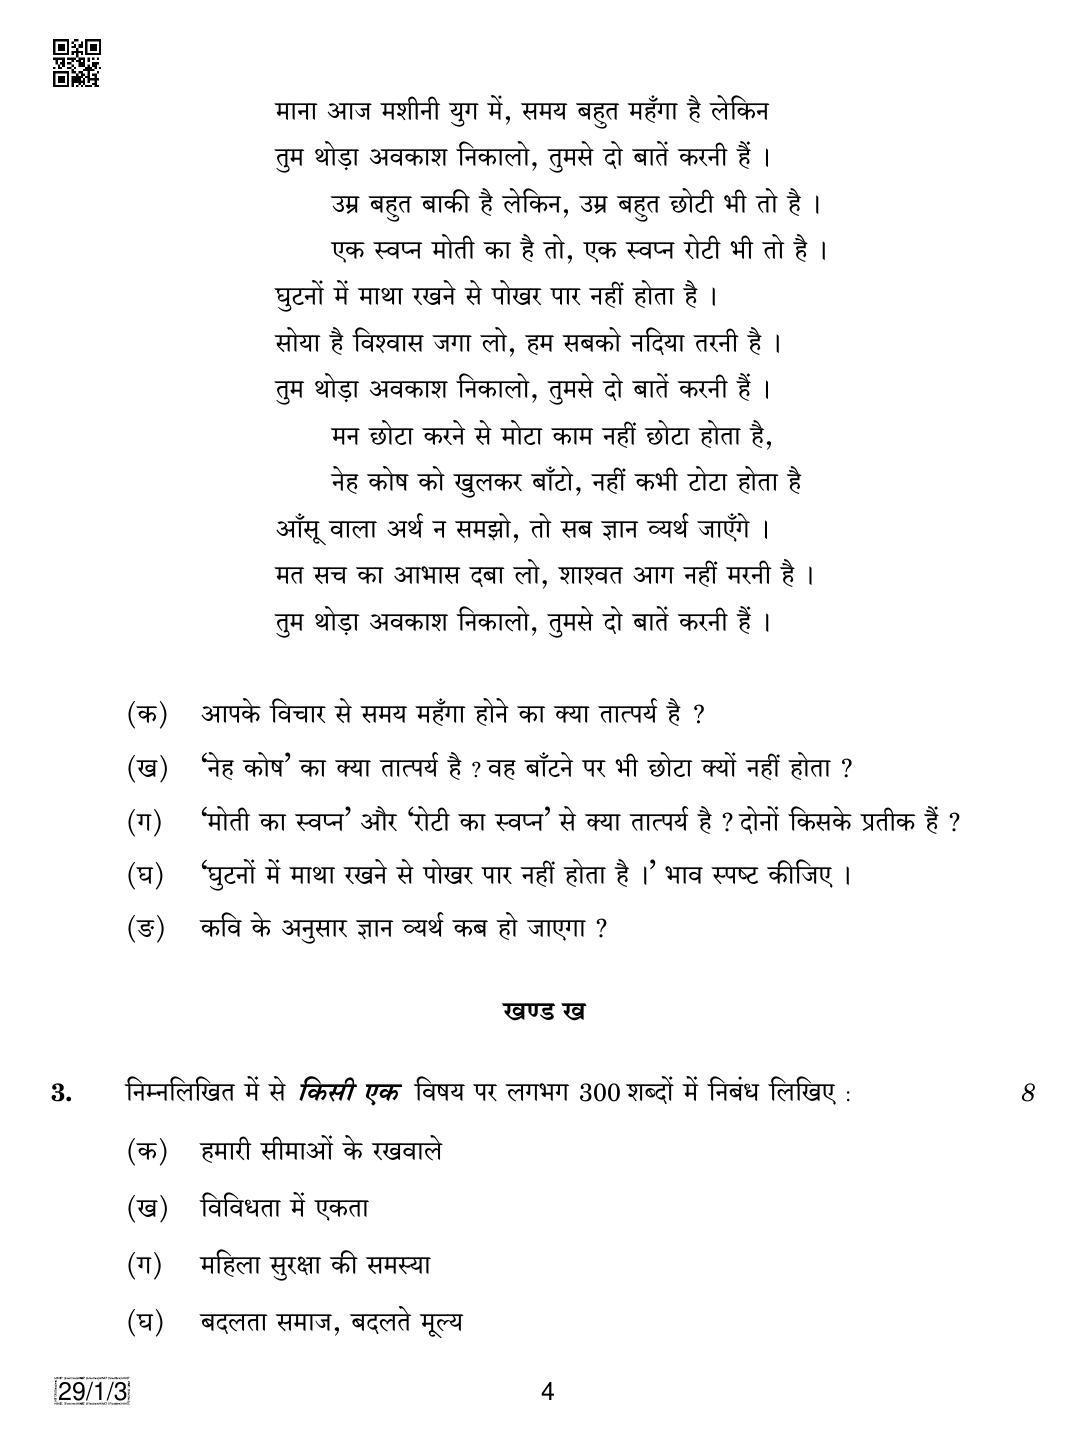 CBSE Class 12 29-1-3 HINDI ELECTIVE 2019 Compartment Question Paper - Page 4